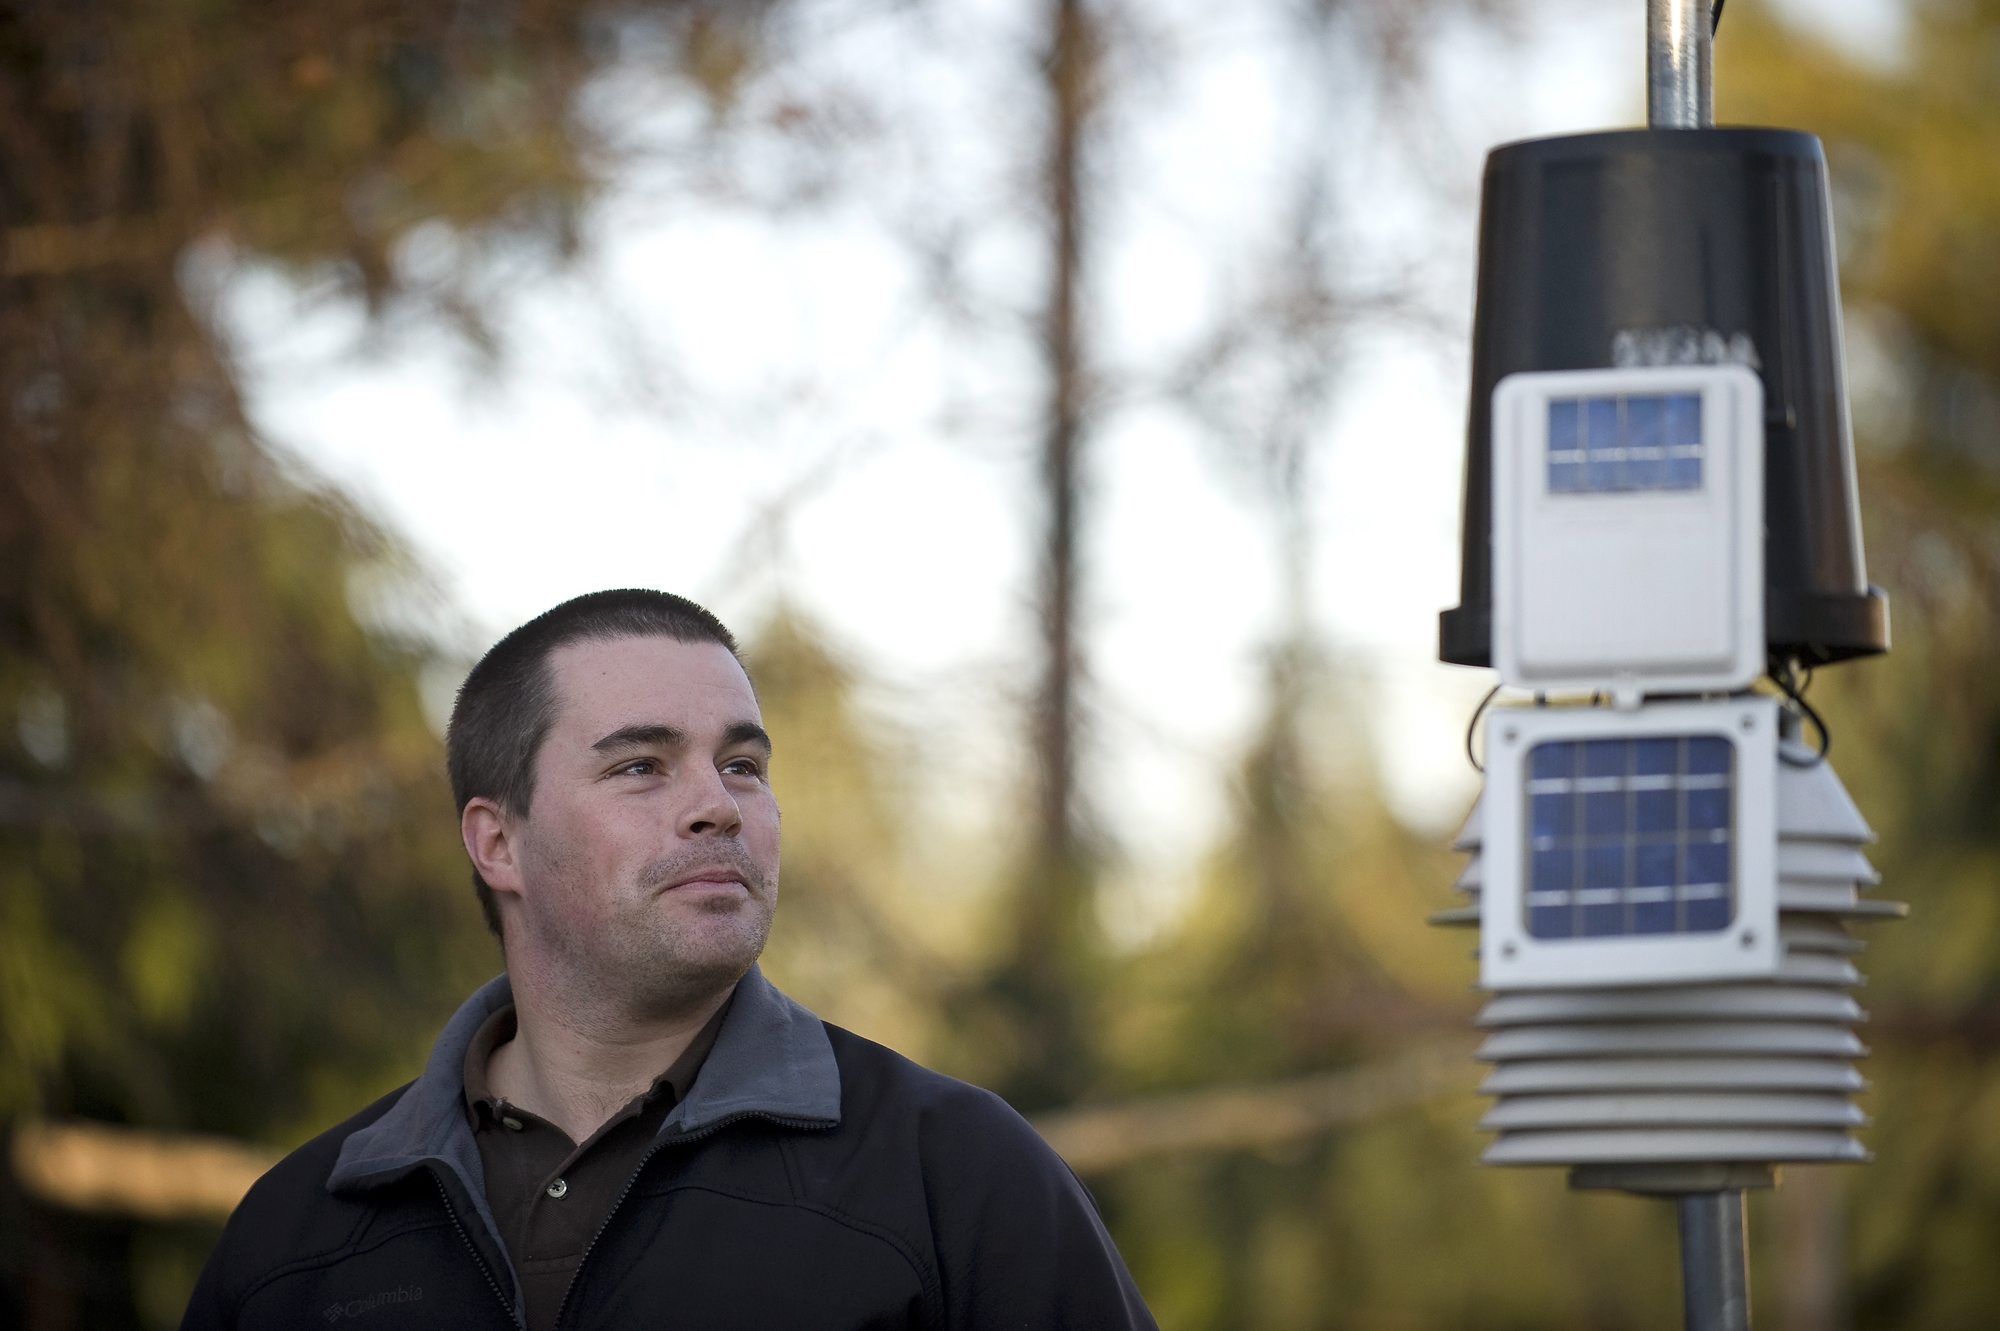 Tyler Mode shows off one of his two weather stations, which measures humidity, rain and temperature, at his parents' Vancouver home. Mode's other station is at his home in Battle Ground.